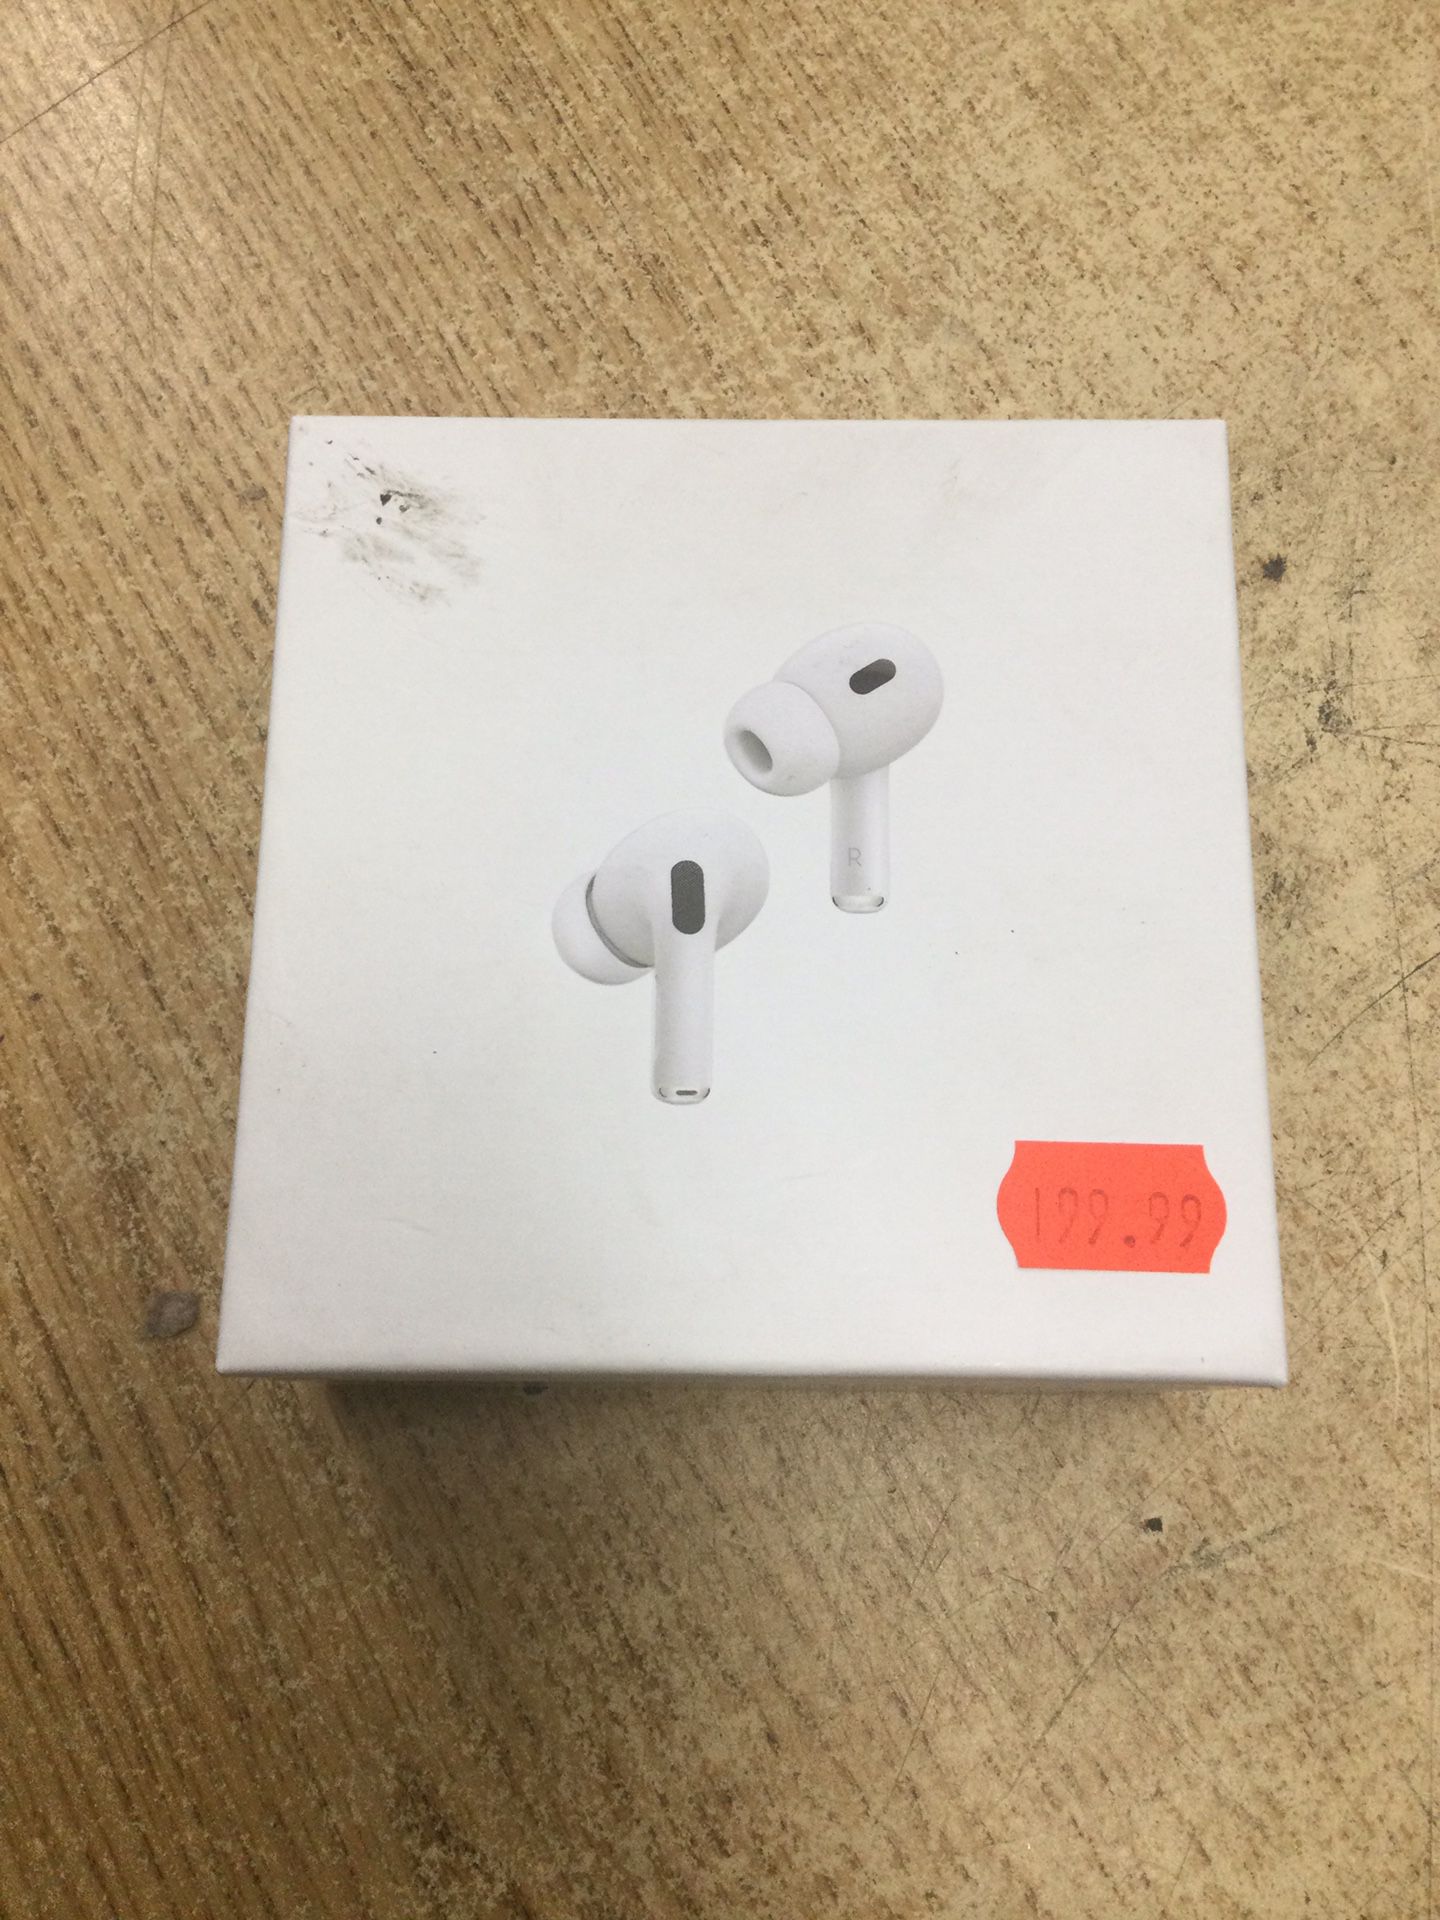 Apple AirPods Pro (2nd Generation) Wireless Earbuds ……..